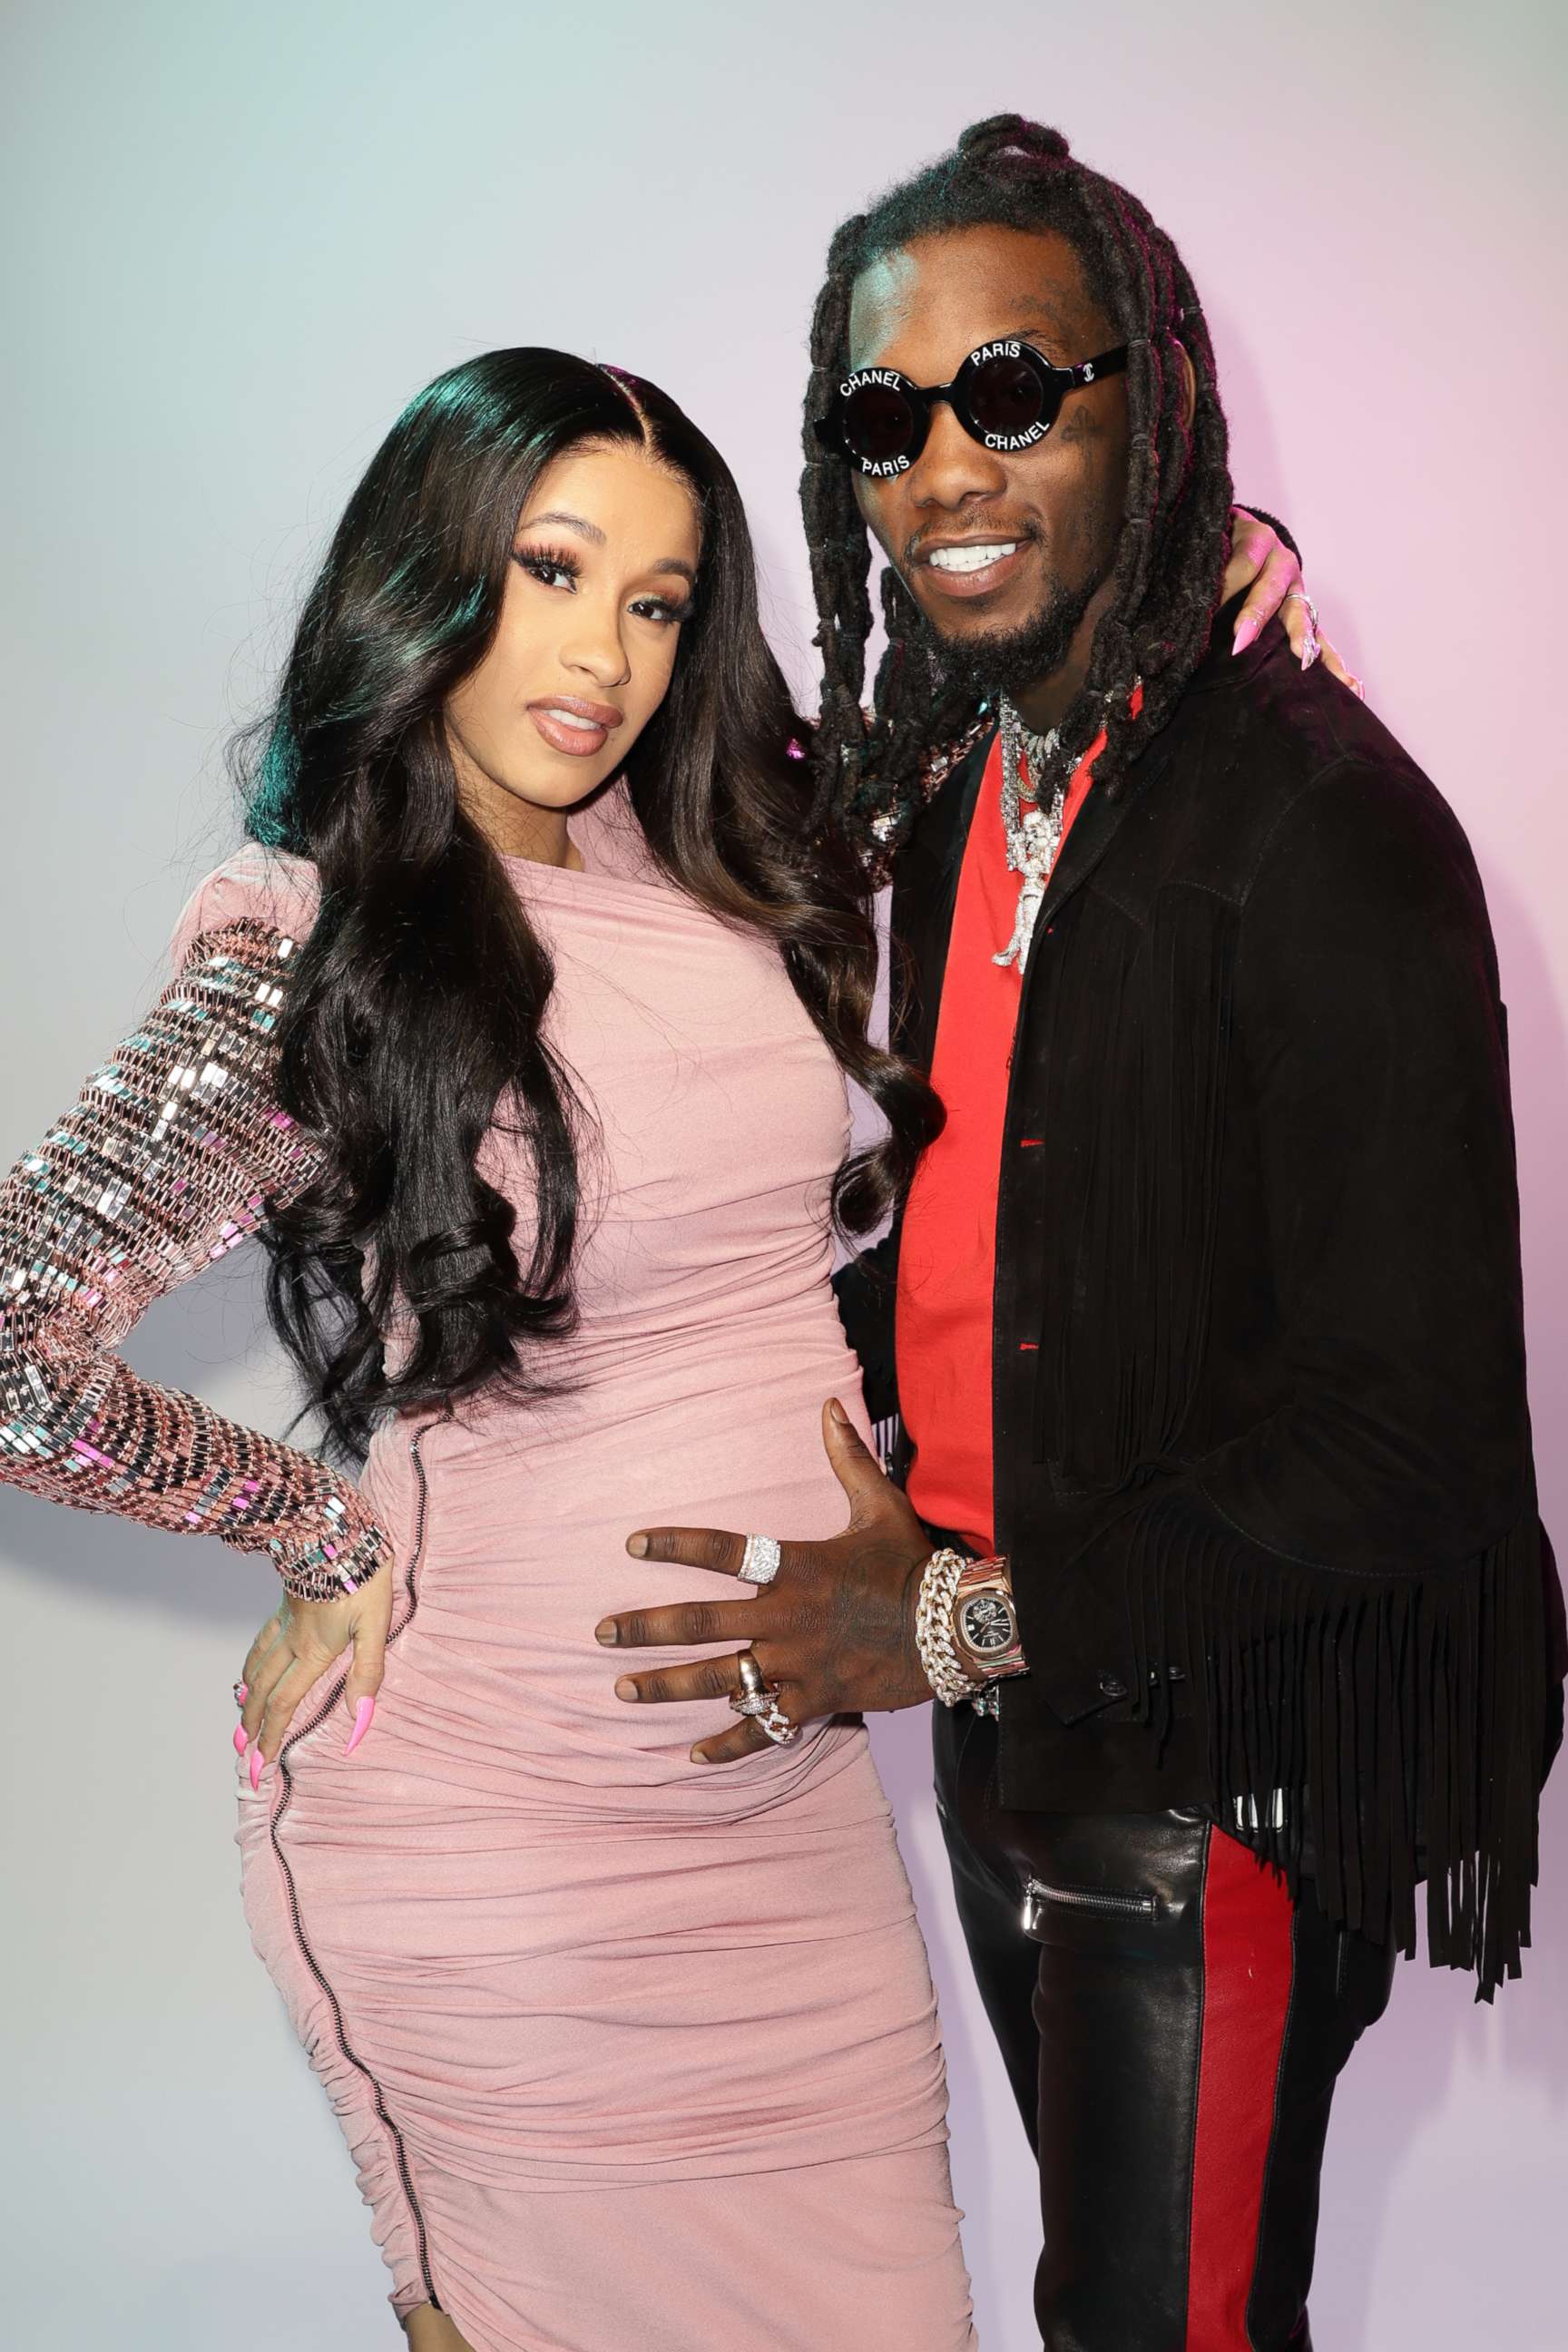 PHOTO: Cardi B and Offset are pictured backstage at the Mandalay Bay Resort and Casino in Las Vegas, April 26, 2018.